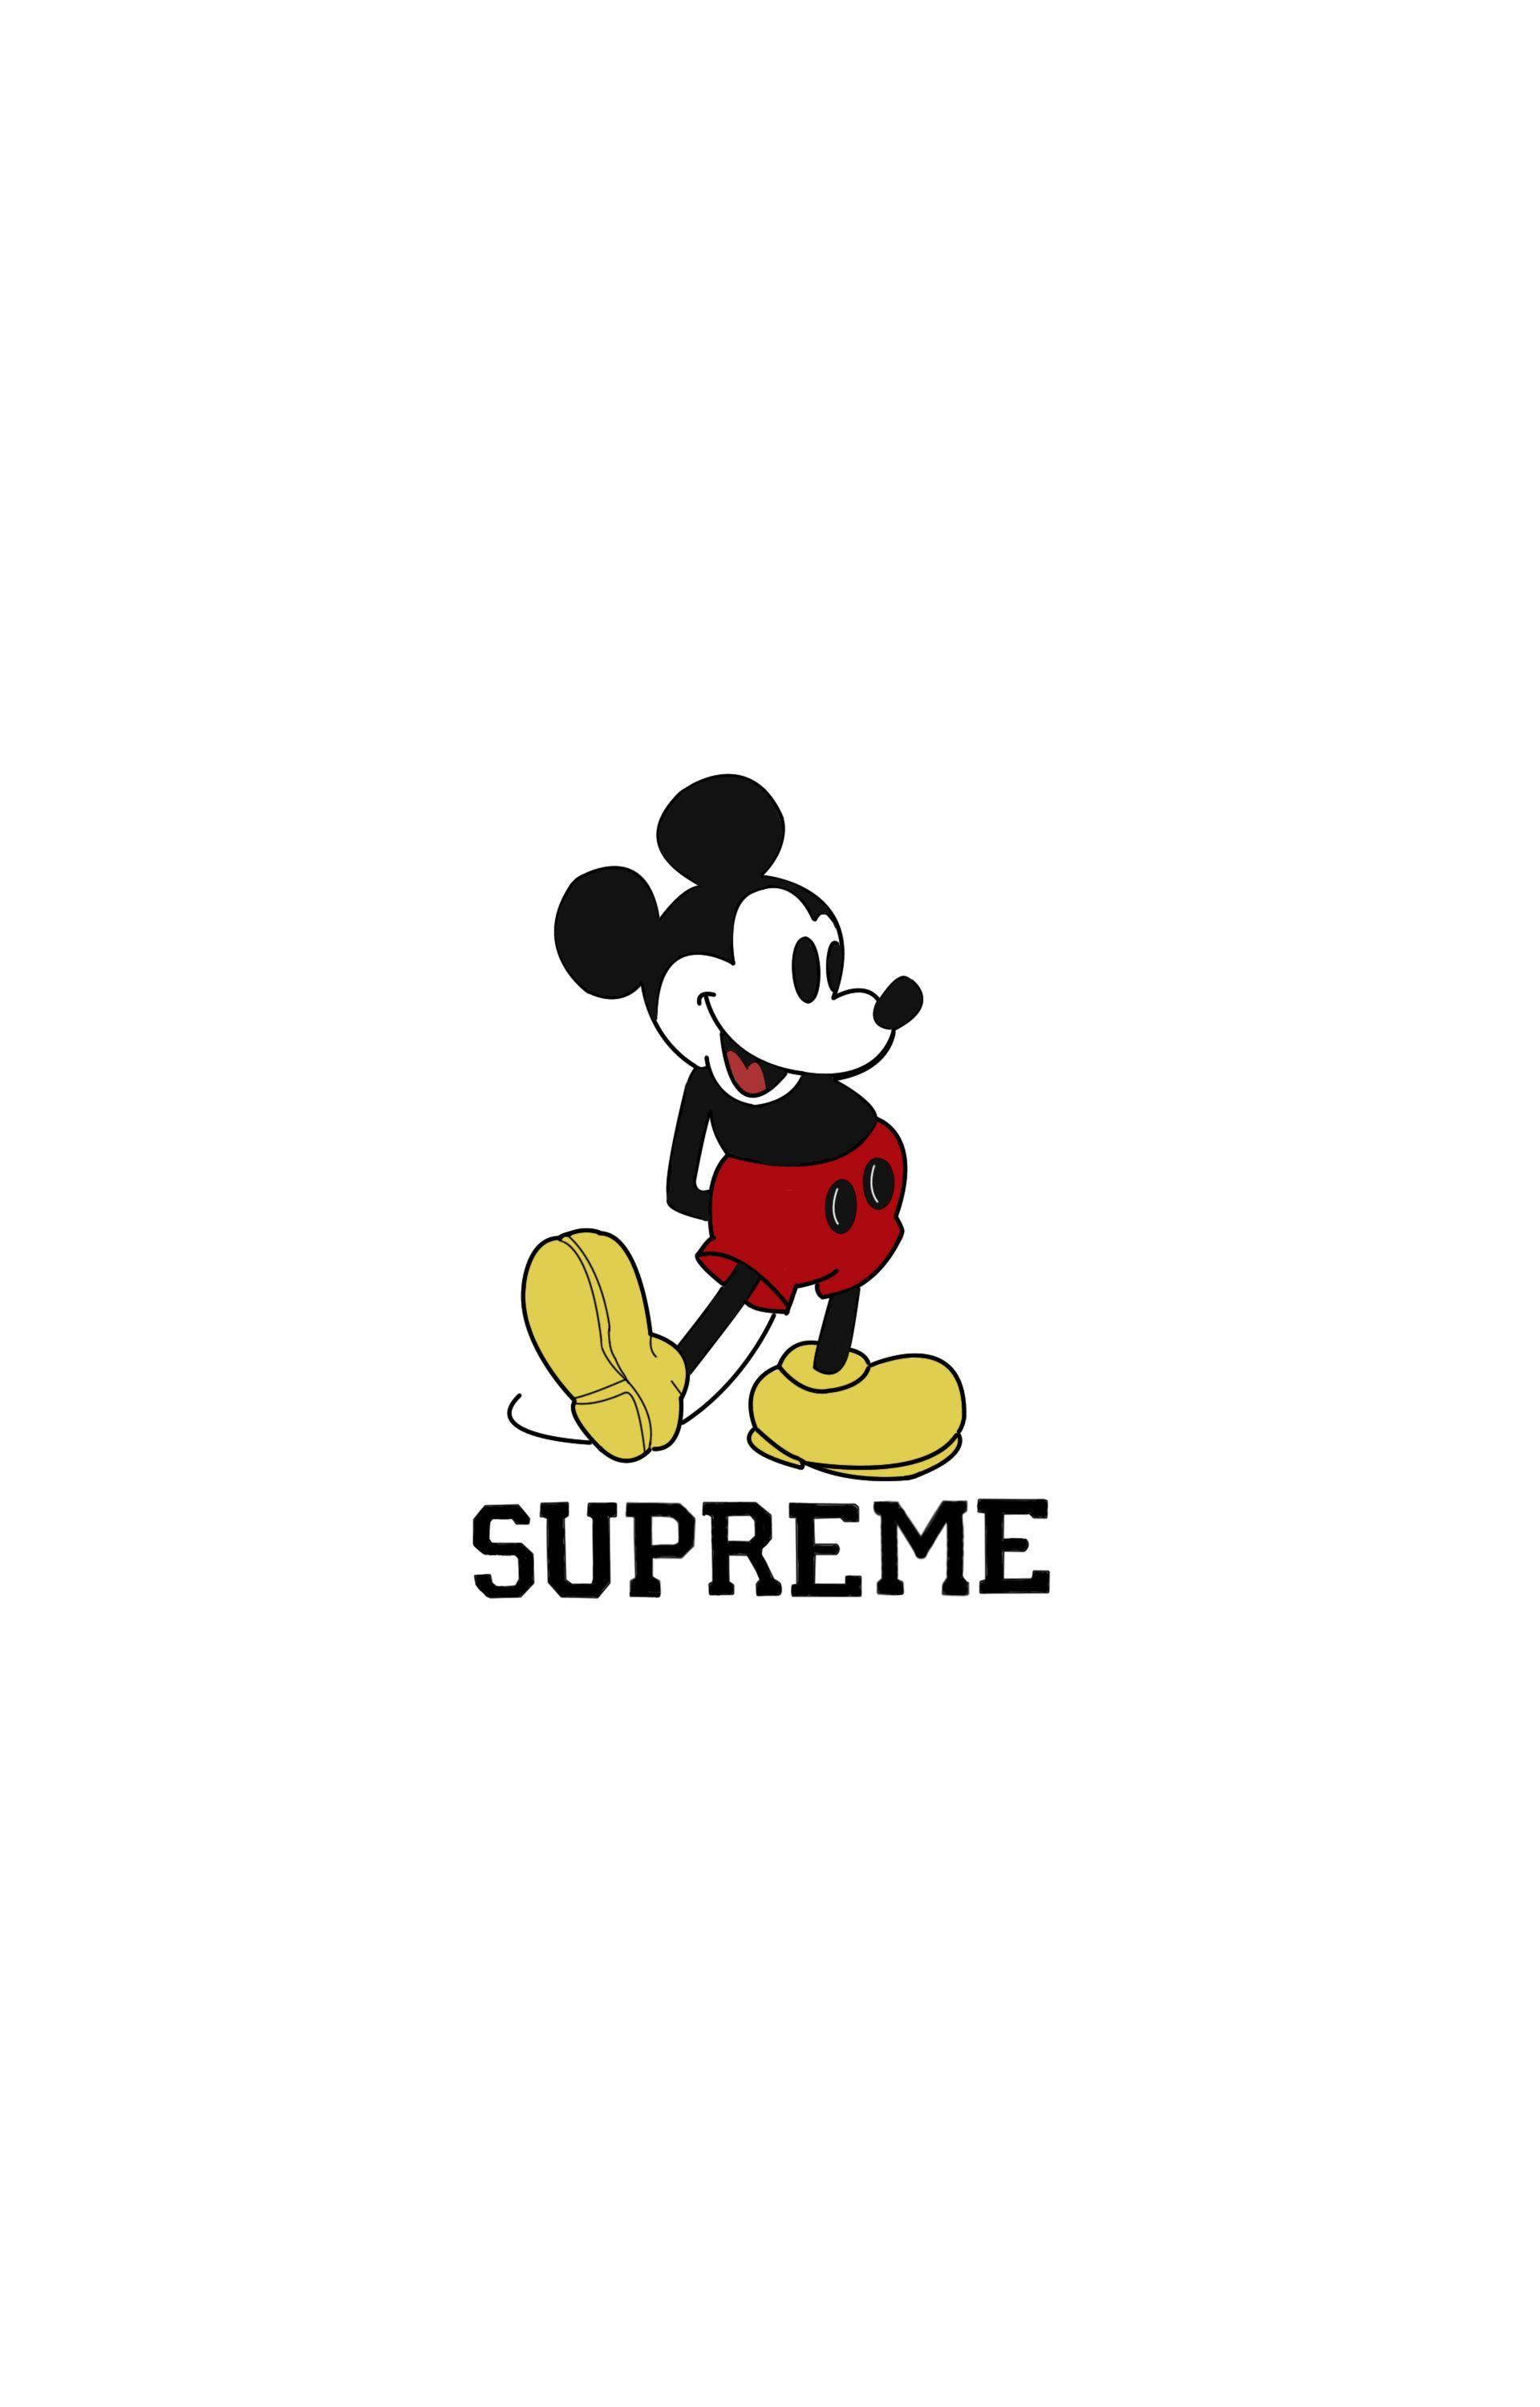 Can someone make an iphone 5 wallpaper of the supreme